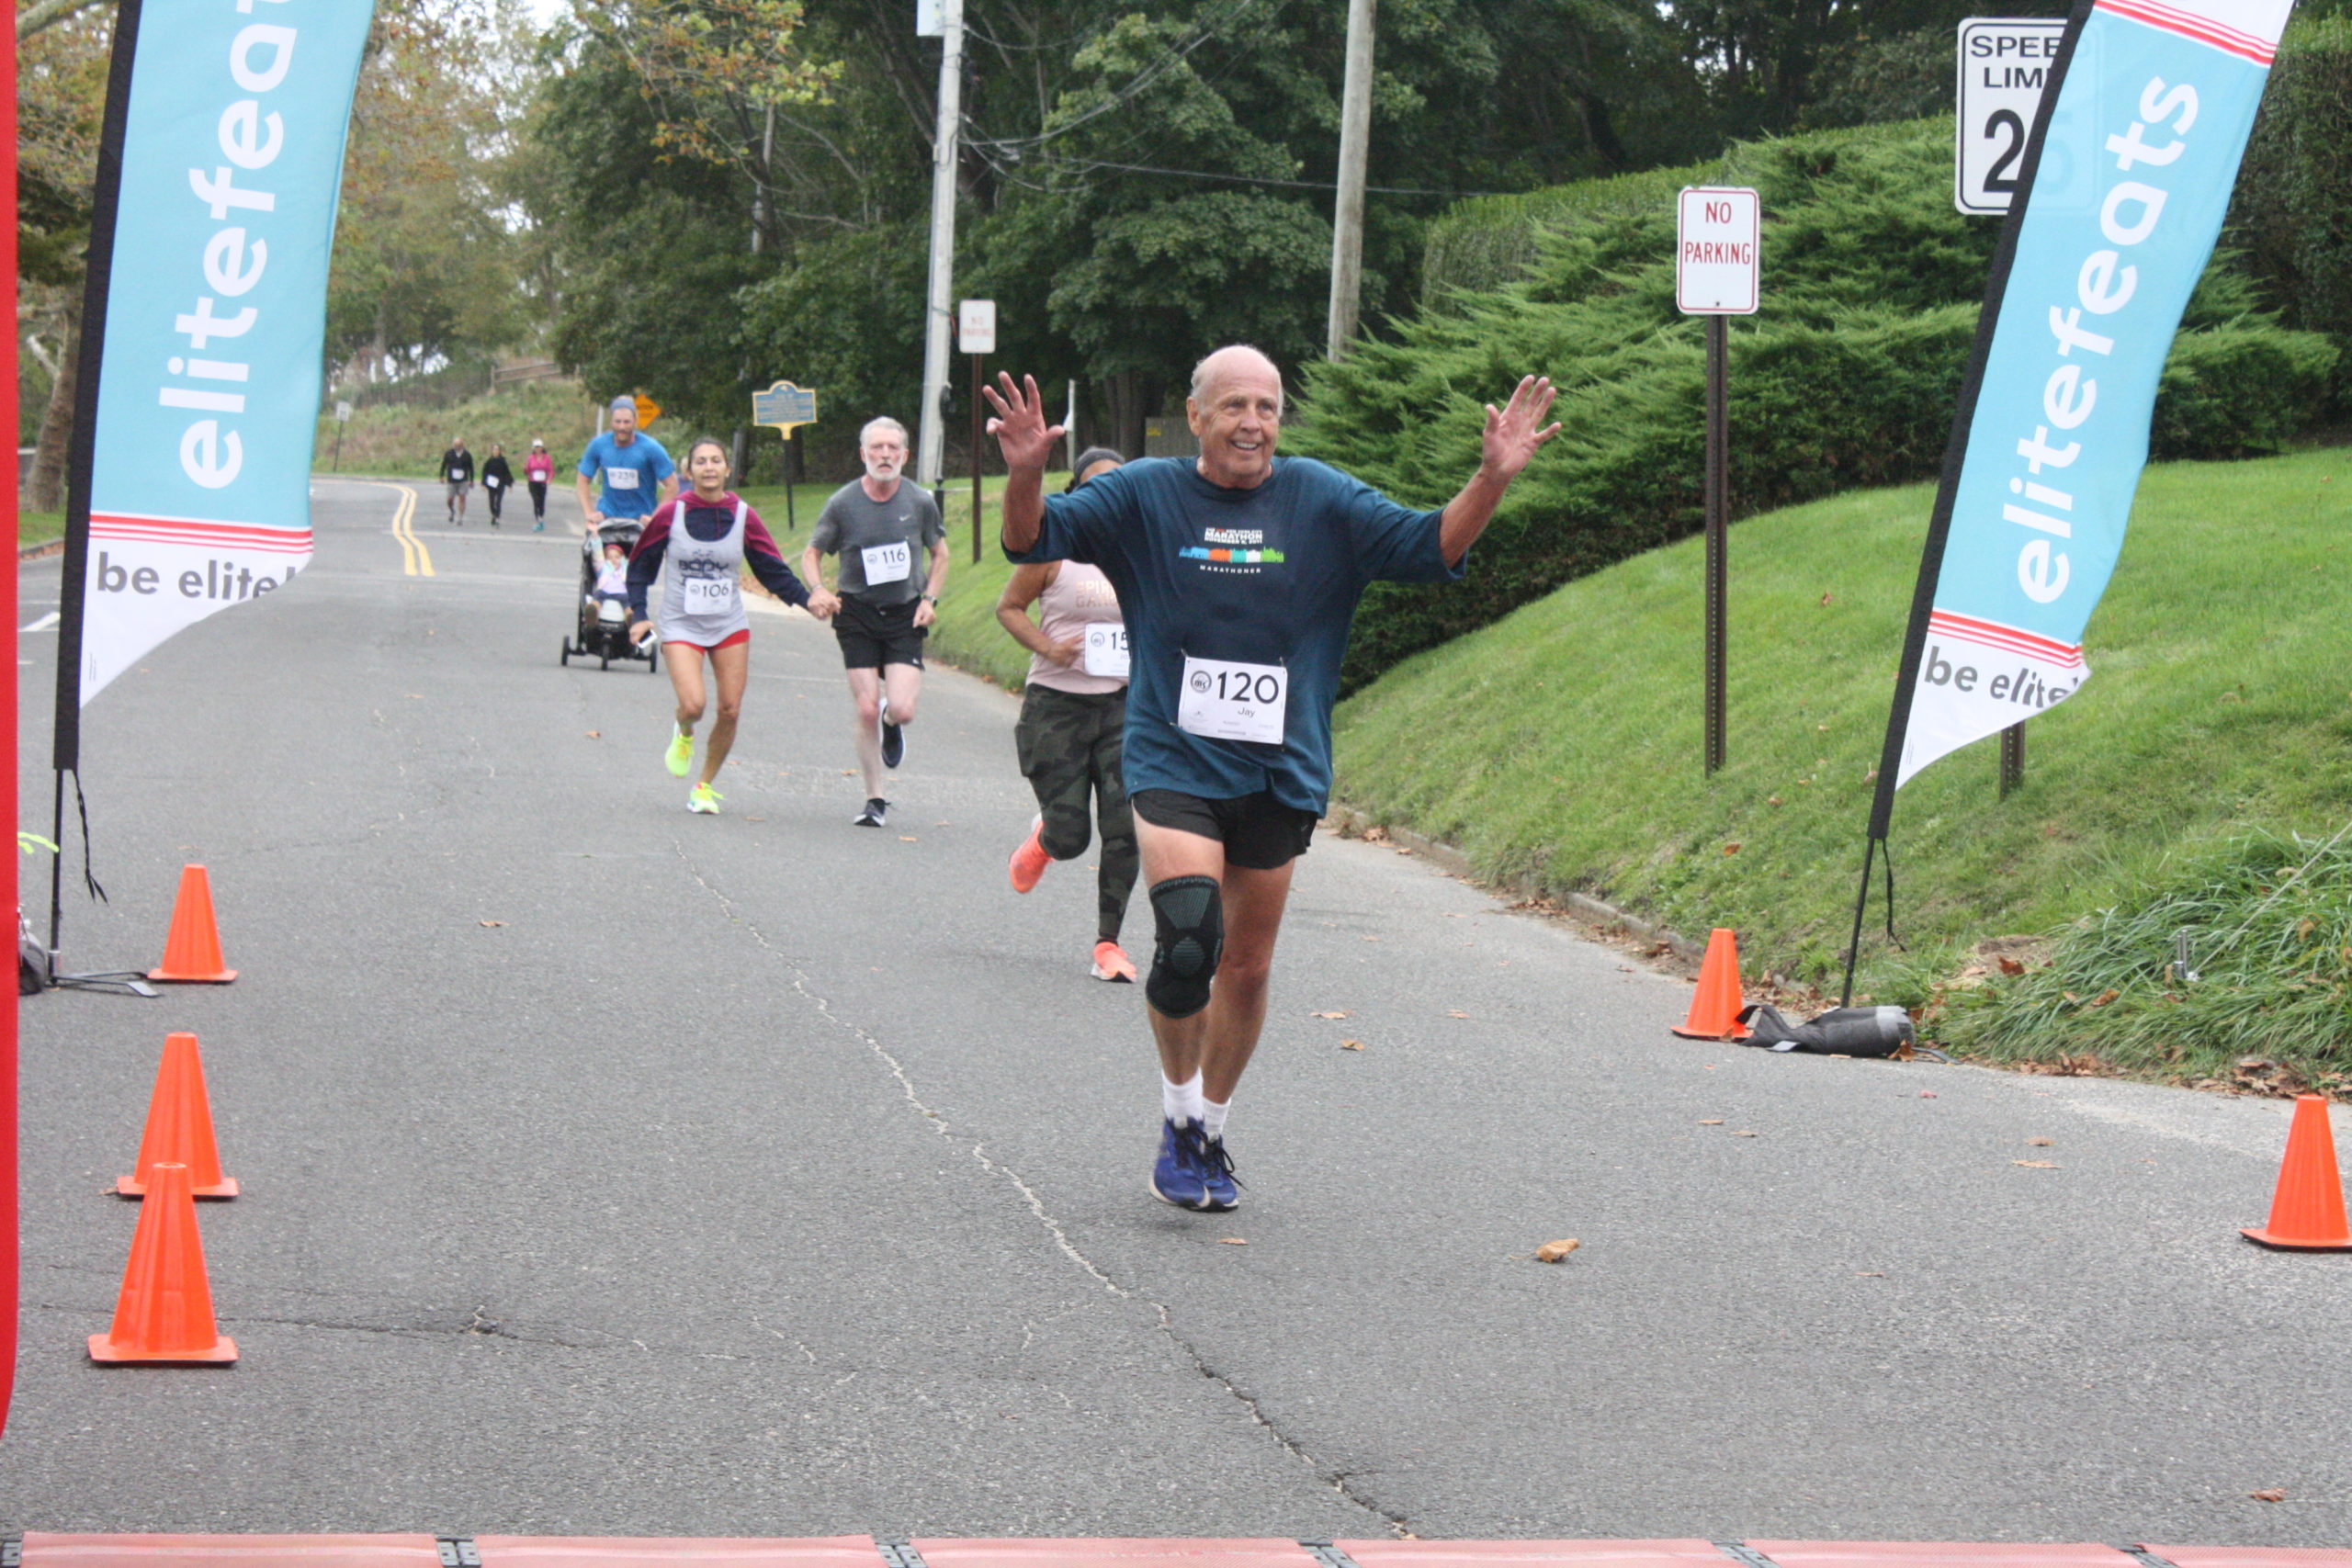 Runners cross the finish line in the Firecracker 8K on Sunday morning in Southampton Village.